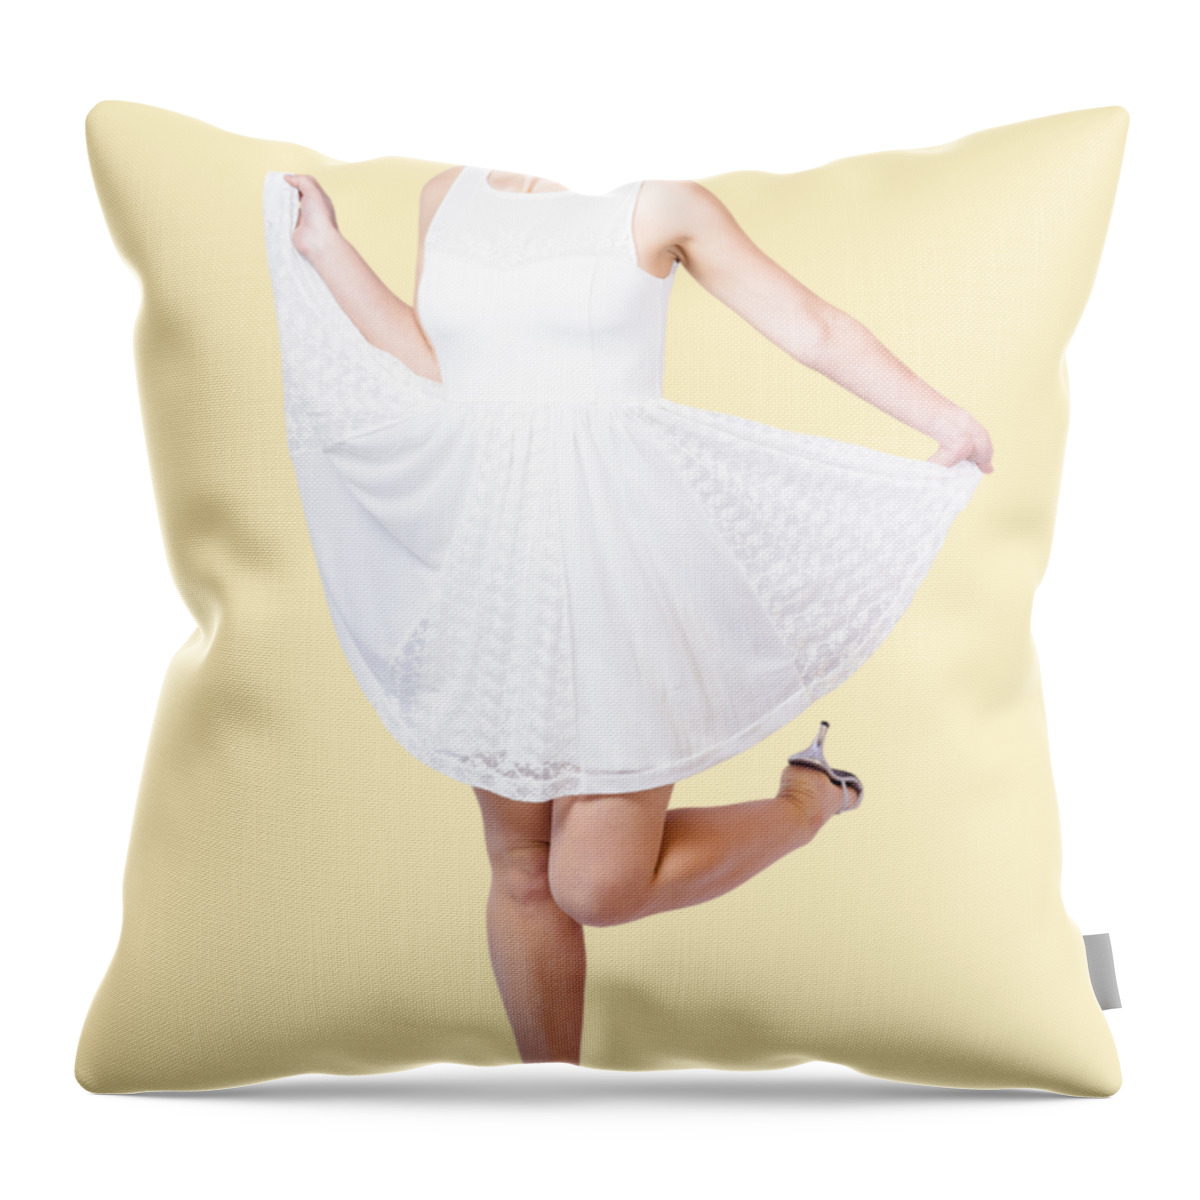 Pin-up Throw Pillow featuring the photograph 50s Pinup Woman In White Dress Dancing by Jorgo Photography